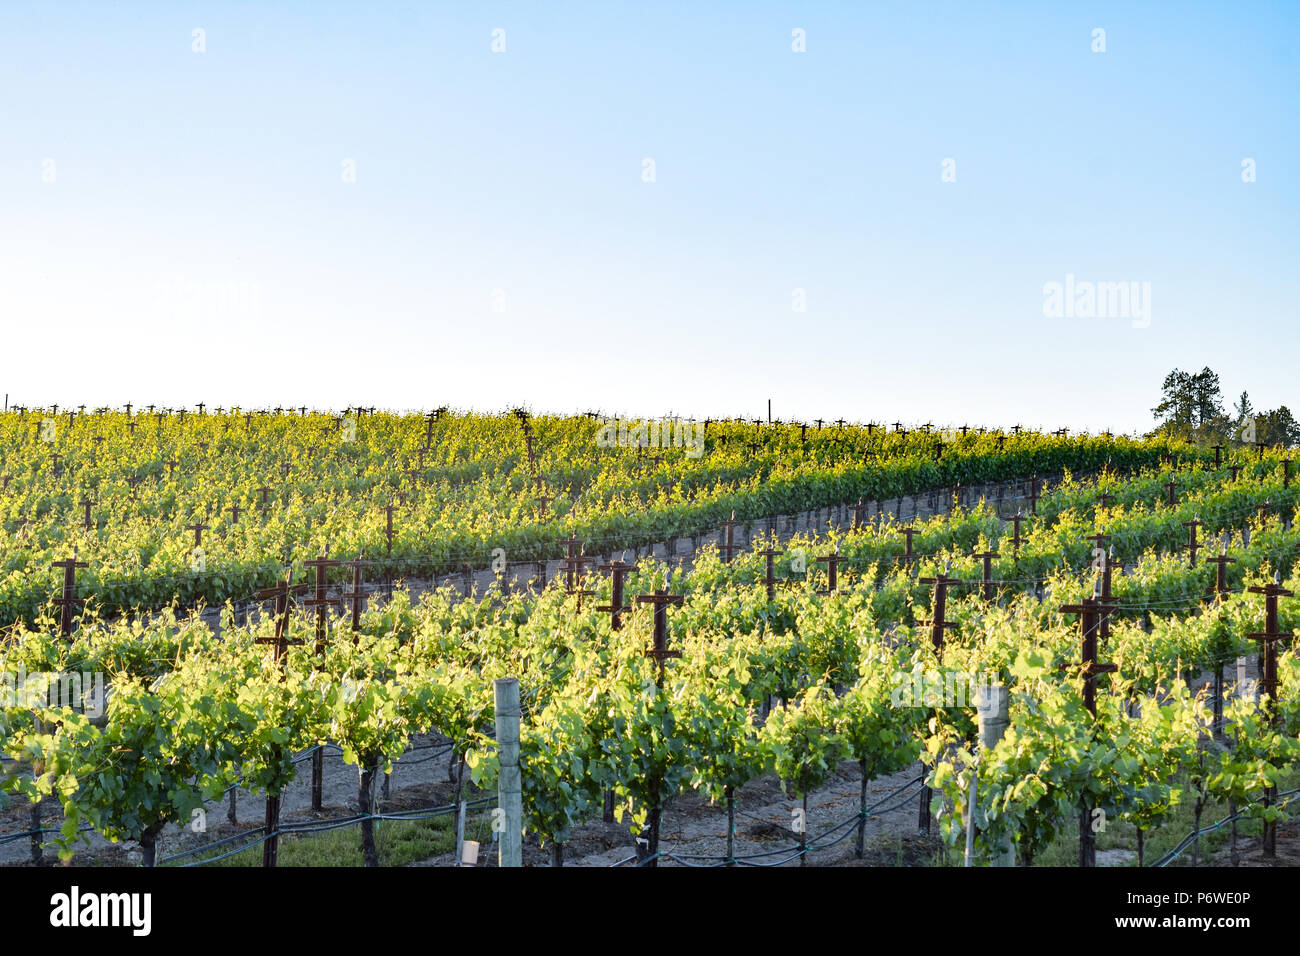 The summer sun slowly sets over a vineyard in the heart of California wine country near Sonoma. Stock Photo